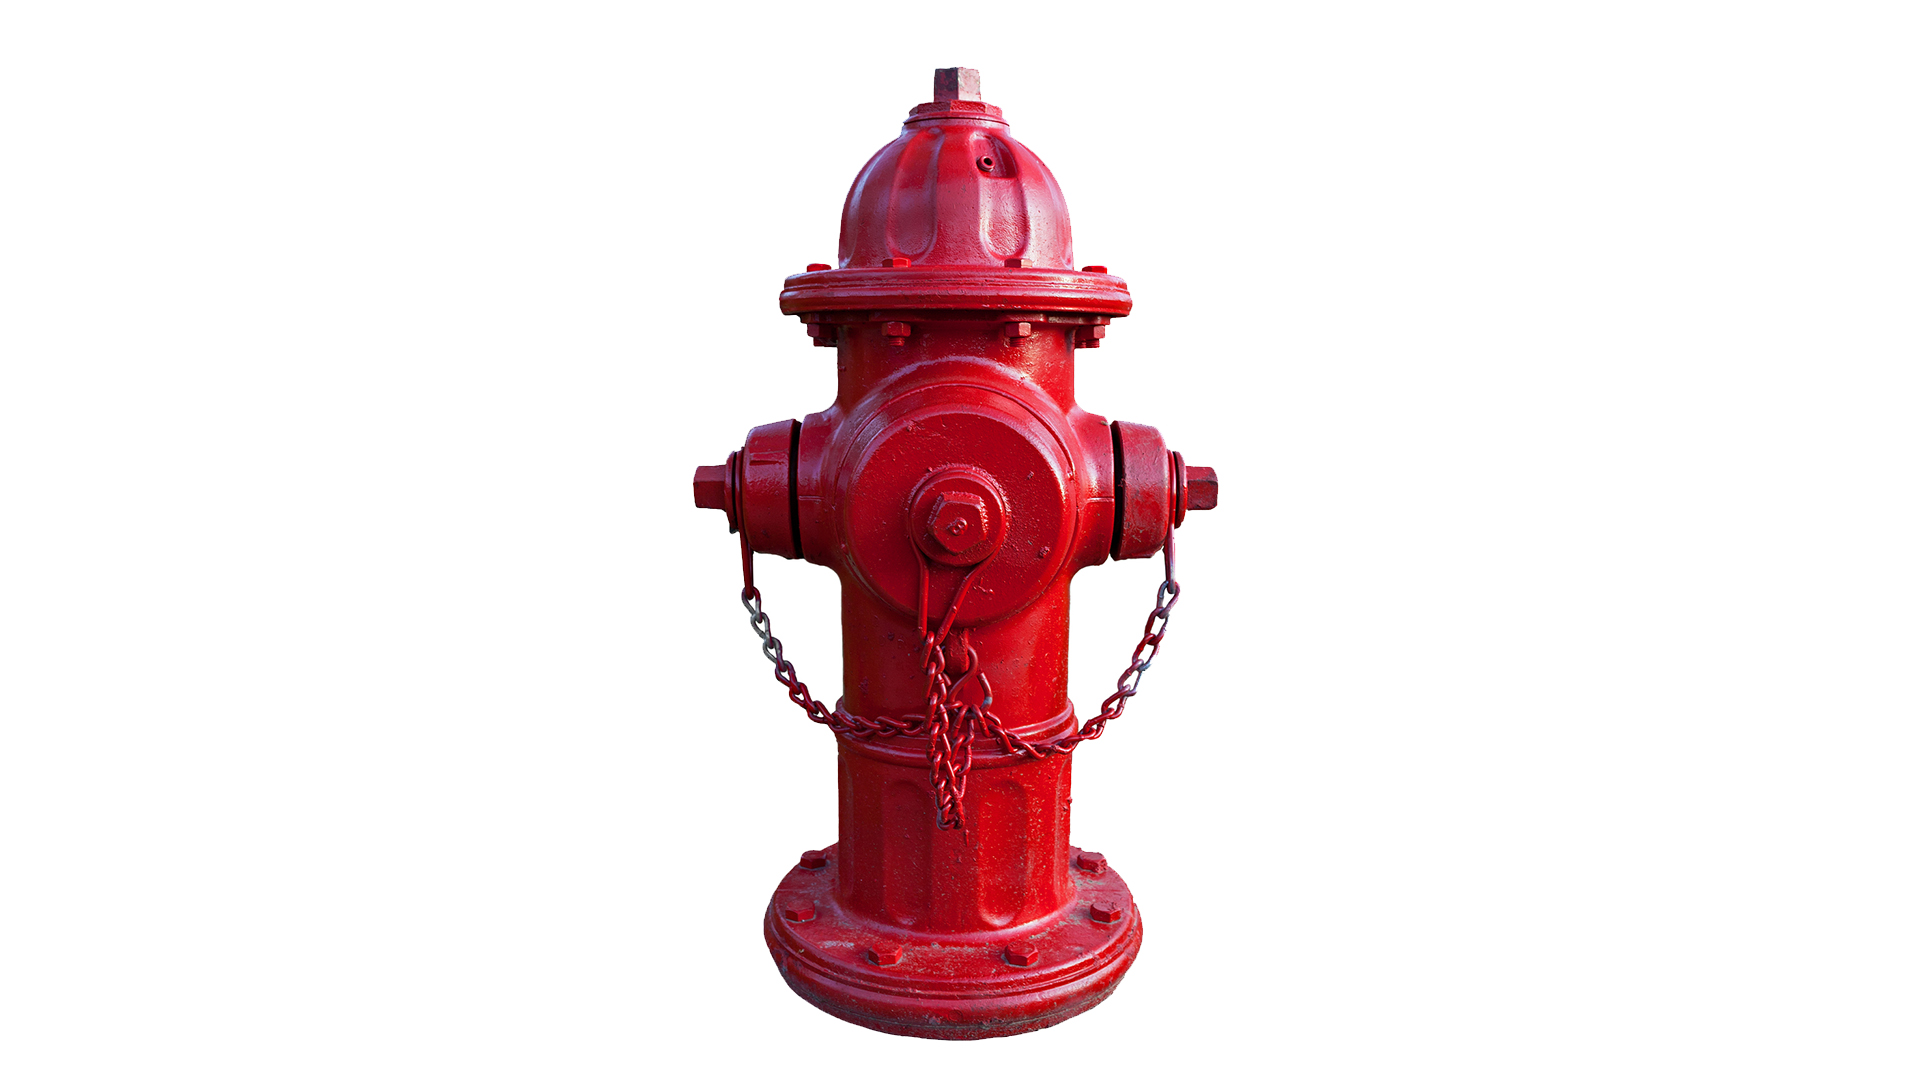 Fire hydrant 4